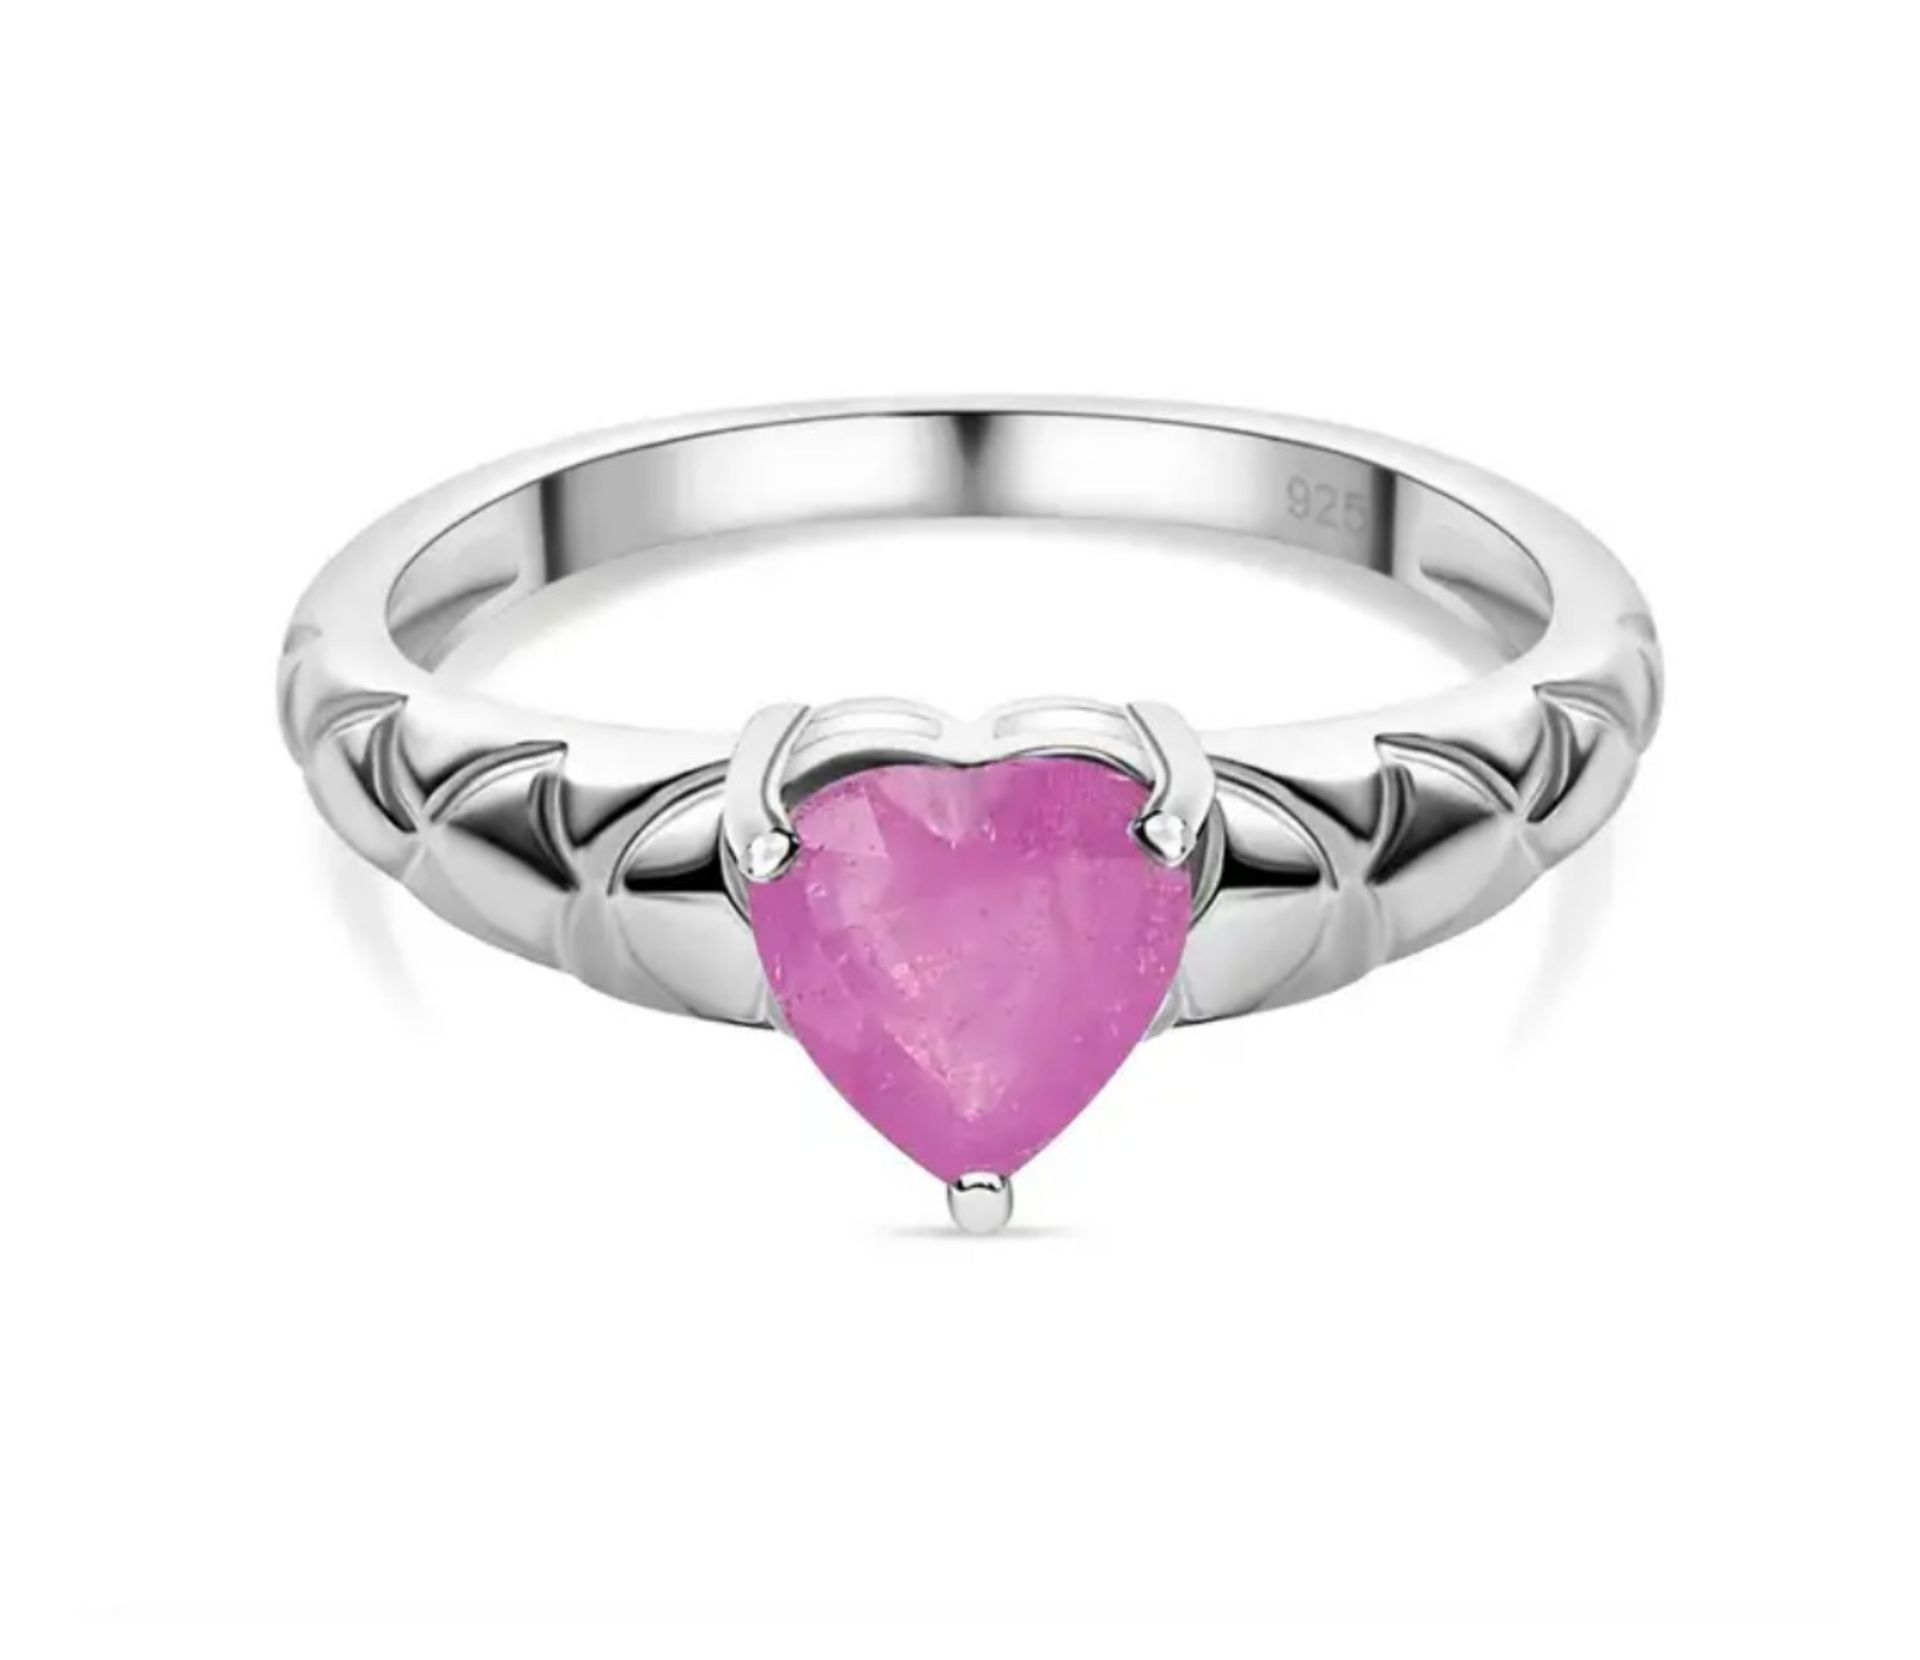 New! Pink Sapphire Heart Ring in Sterling Silver - Image 3 of 5